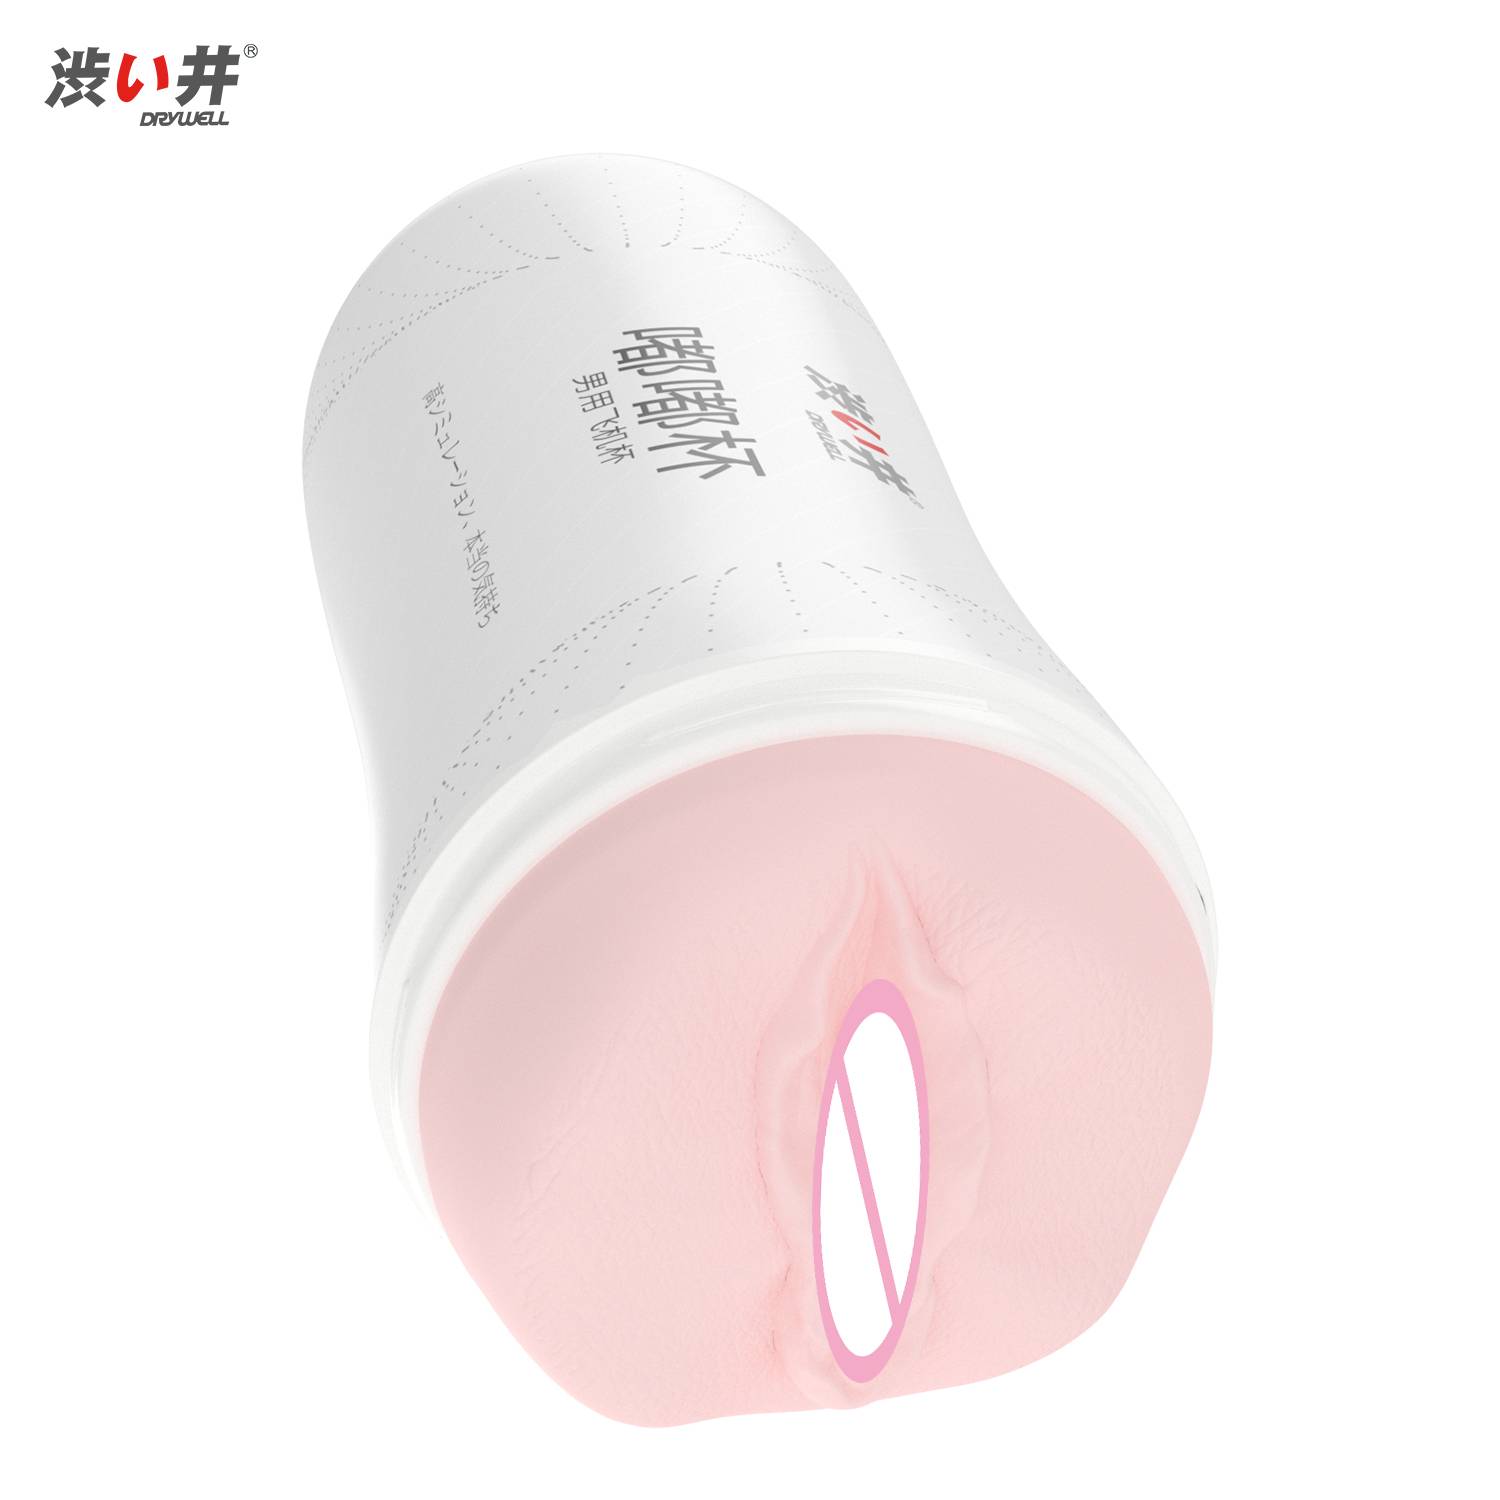 DRY WELL Male Masturbator Cup Soft Pussy Sex Toys Realistic Vagina for Men Silicone Pocket Pussy Mens Masturbation Sex Products